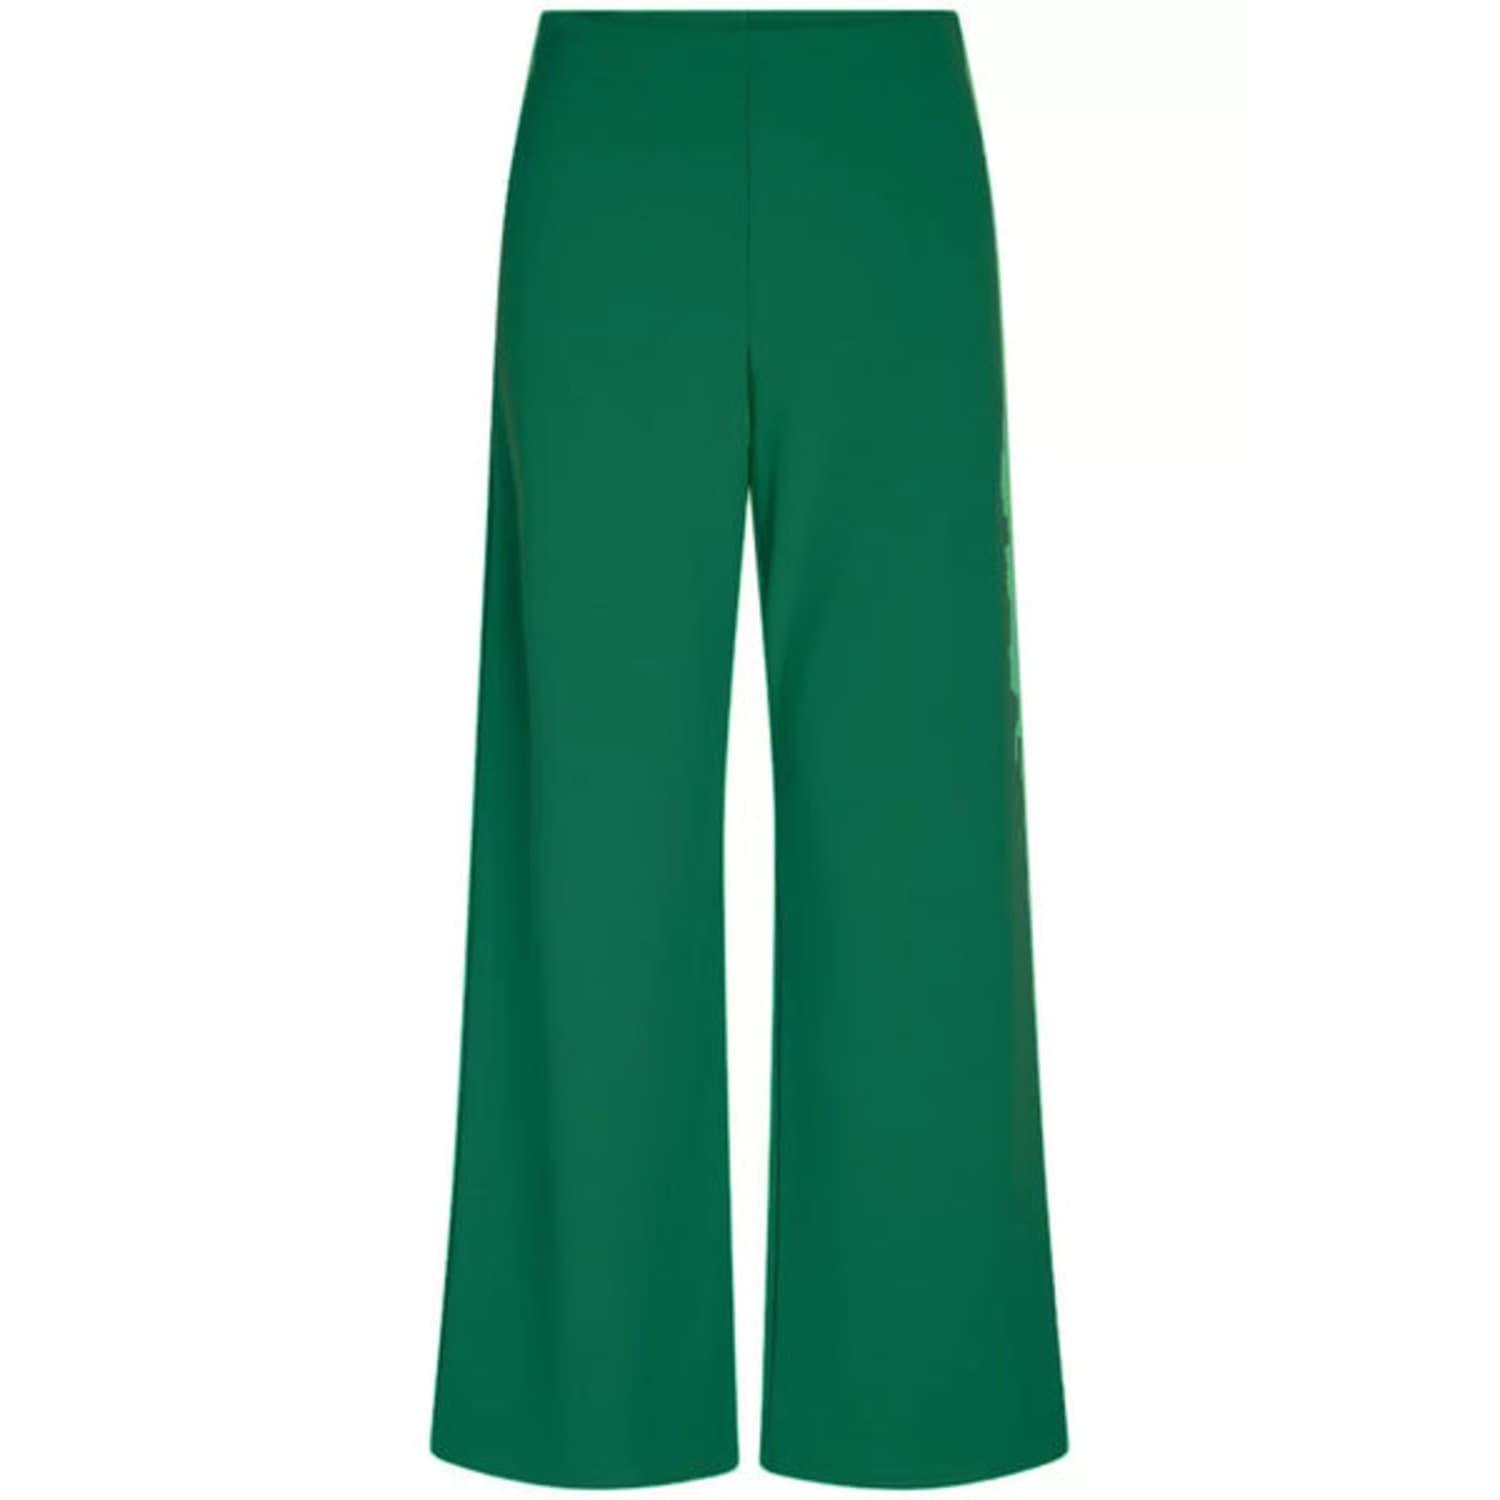 Sisterspoint Neat Pants in Green | Lyst